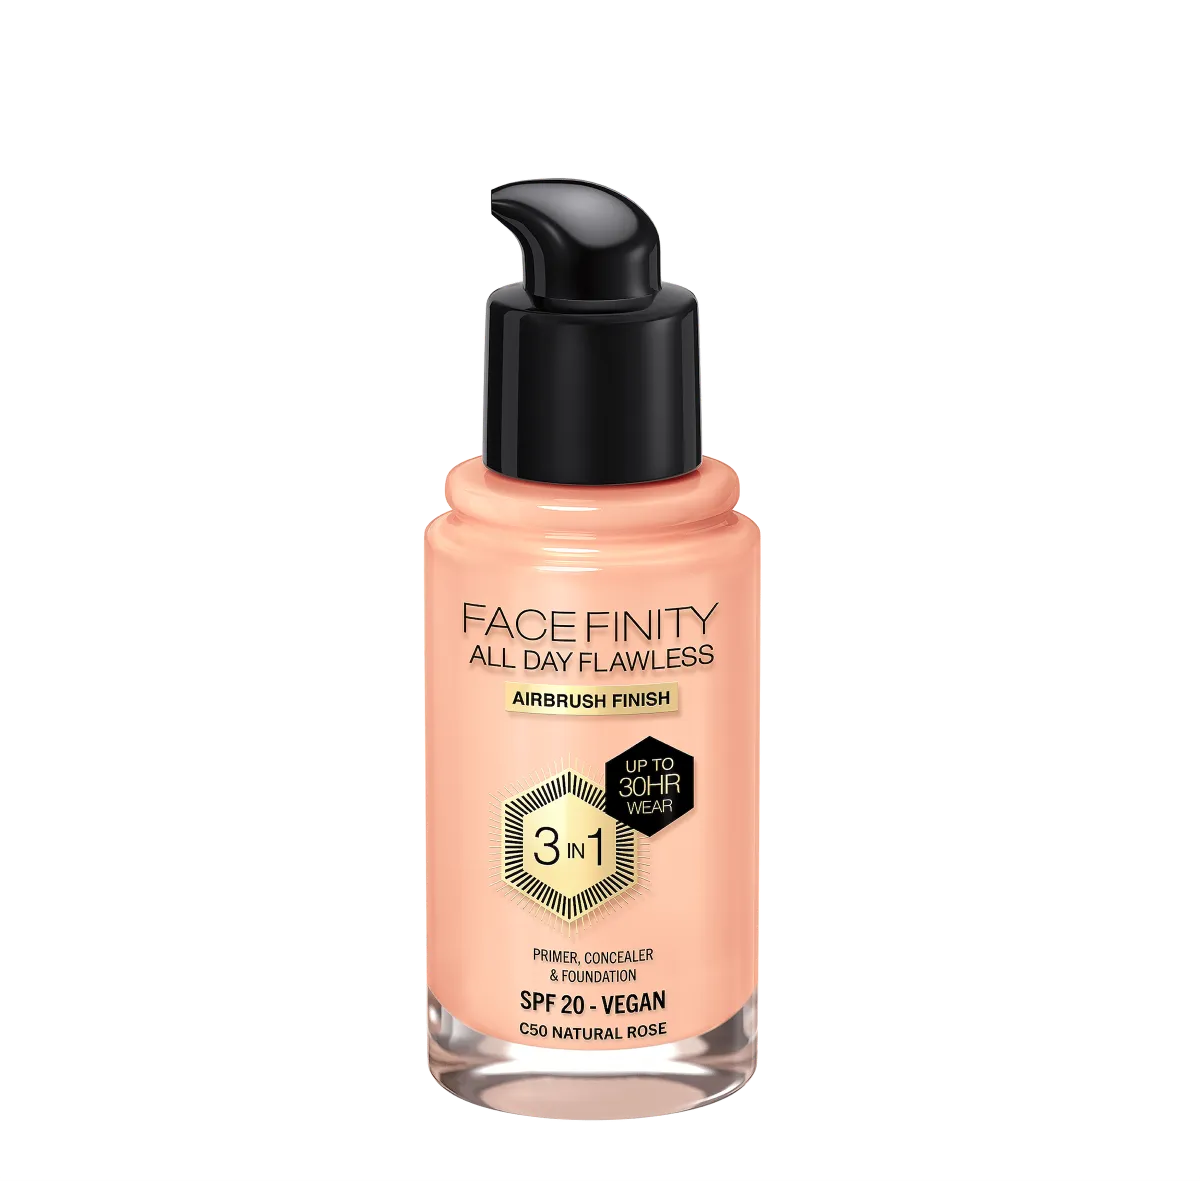 Max Factor Facefinity All Day Flawless Podkład do twarzy 3w1 C50 Natural Rose, 30 ml 